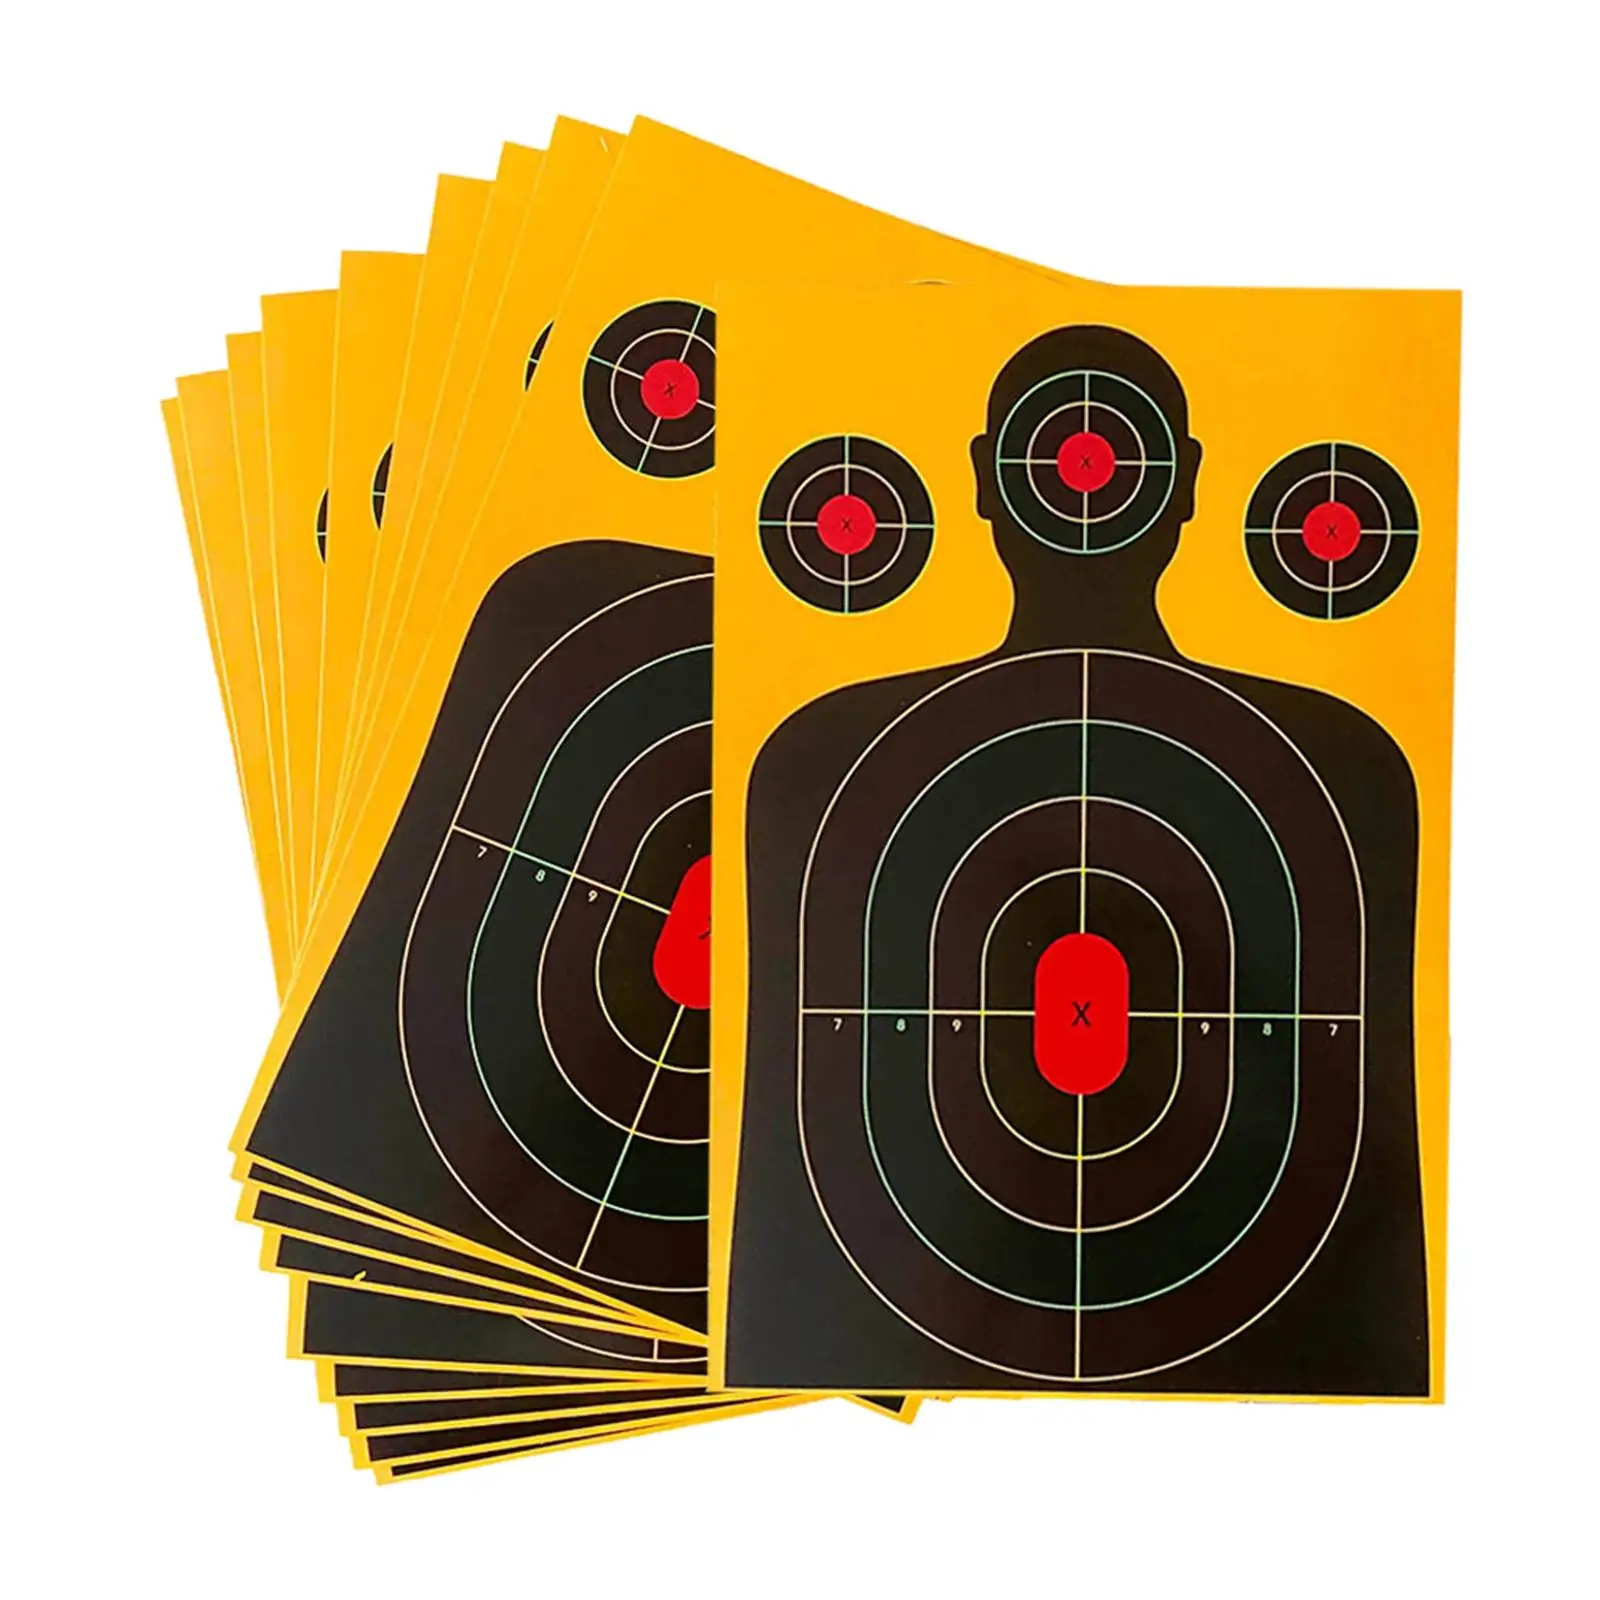 10x Silhouette Target Highly Visible Hunting Hunting Practice Hunting Training Target Target Paper Hunting Silhouette Target